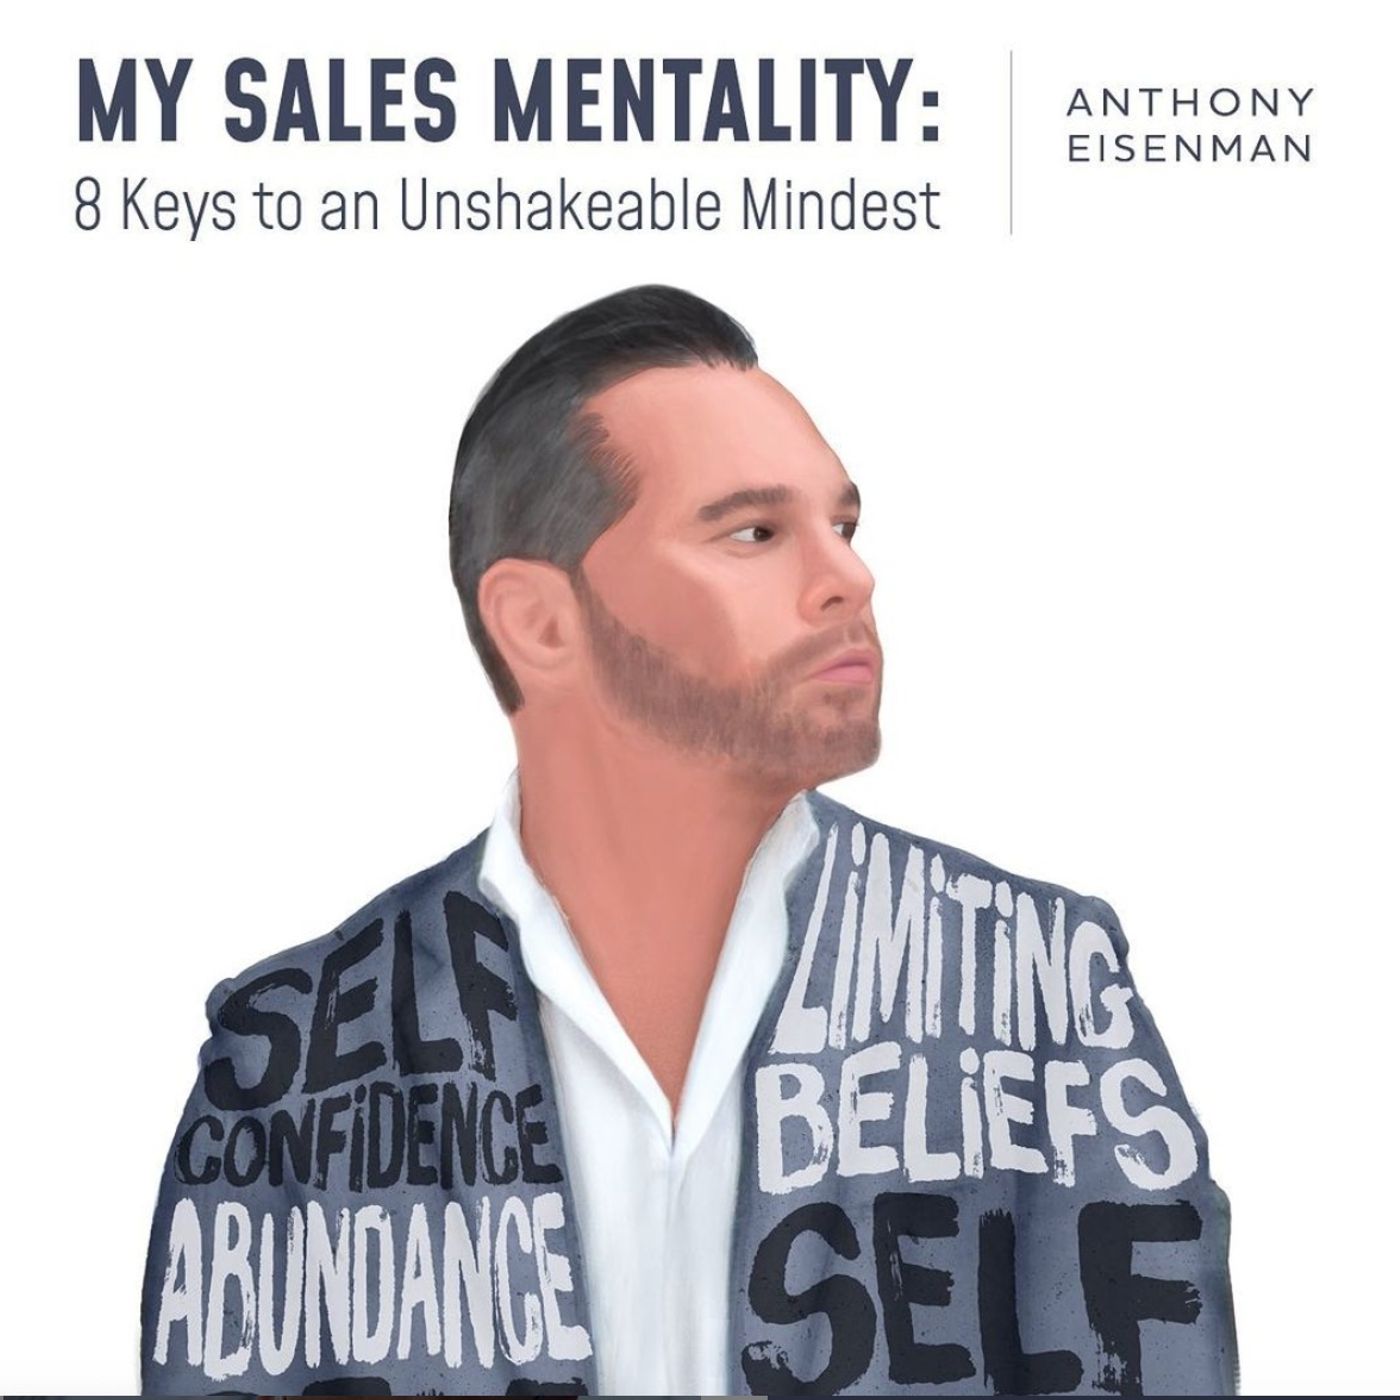 120. Selling knives door-to-door to working with Fortune 50 brands | Anthony Eisenman